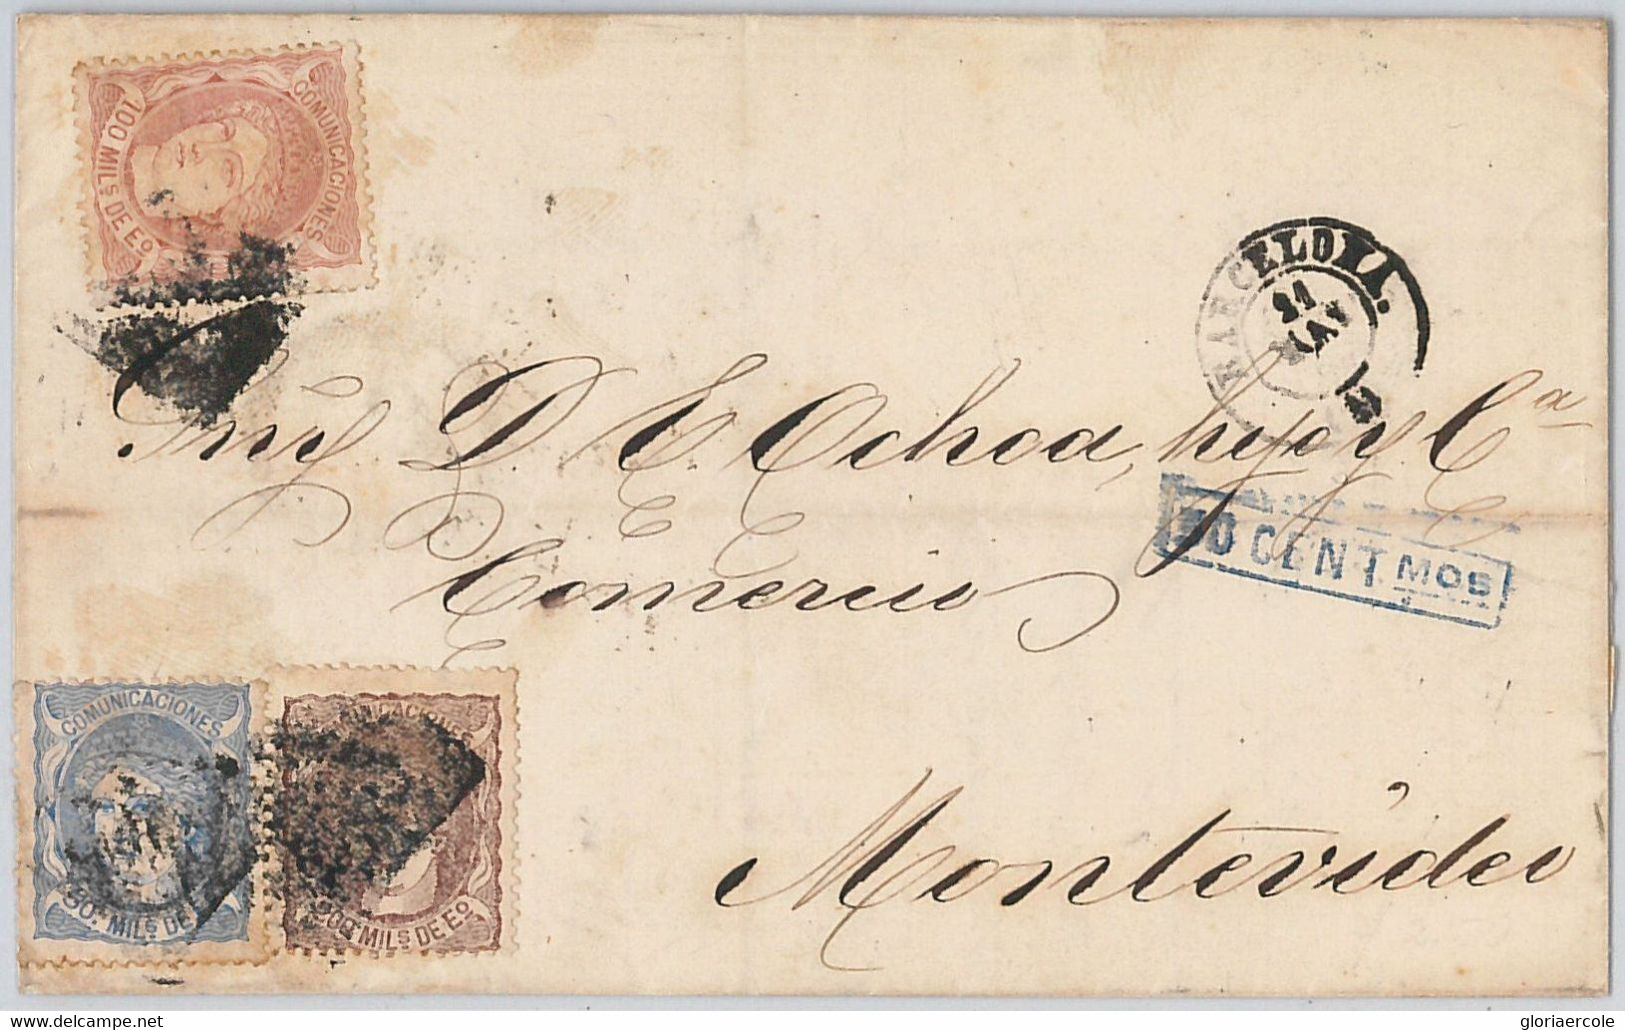 56405  - SPAIN - POSTAL HISTORY: 3 COLOUR FRANKING On Cover To MONTEVIDEO  1870 - Covers & Documents